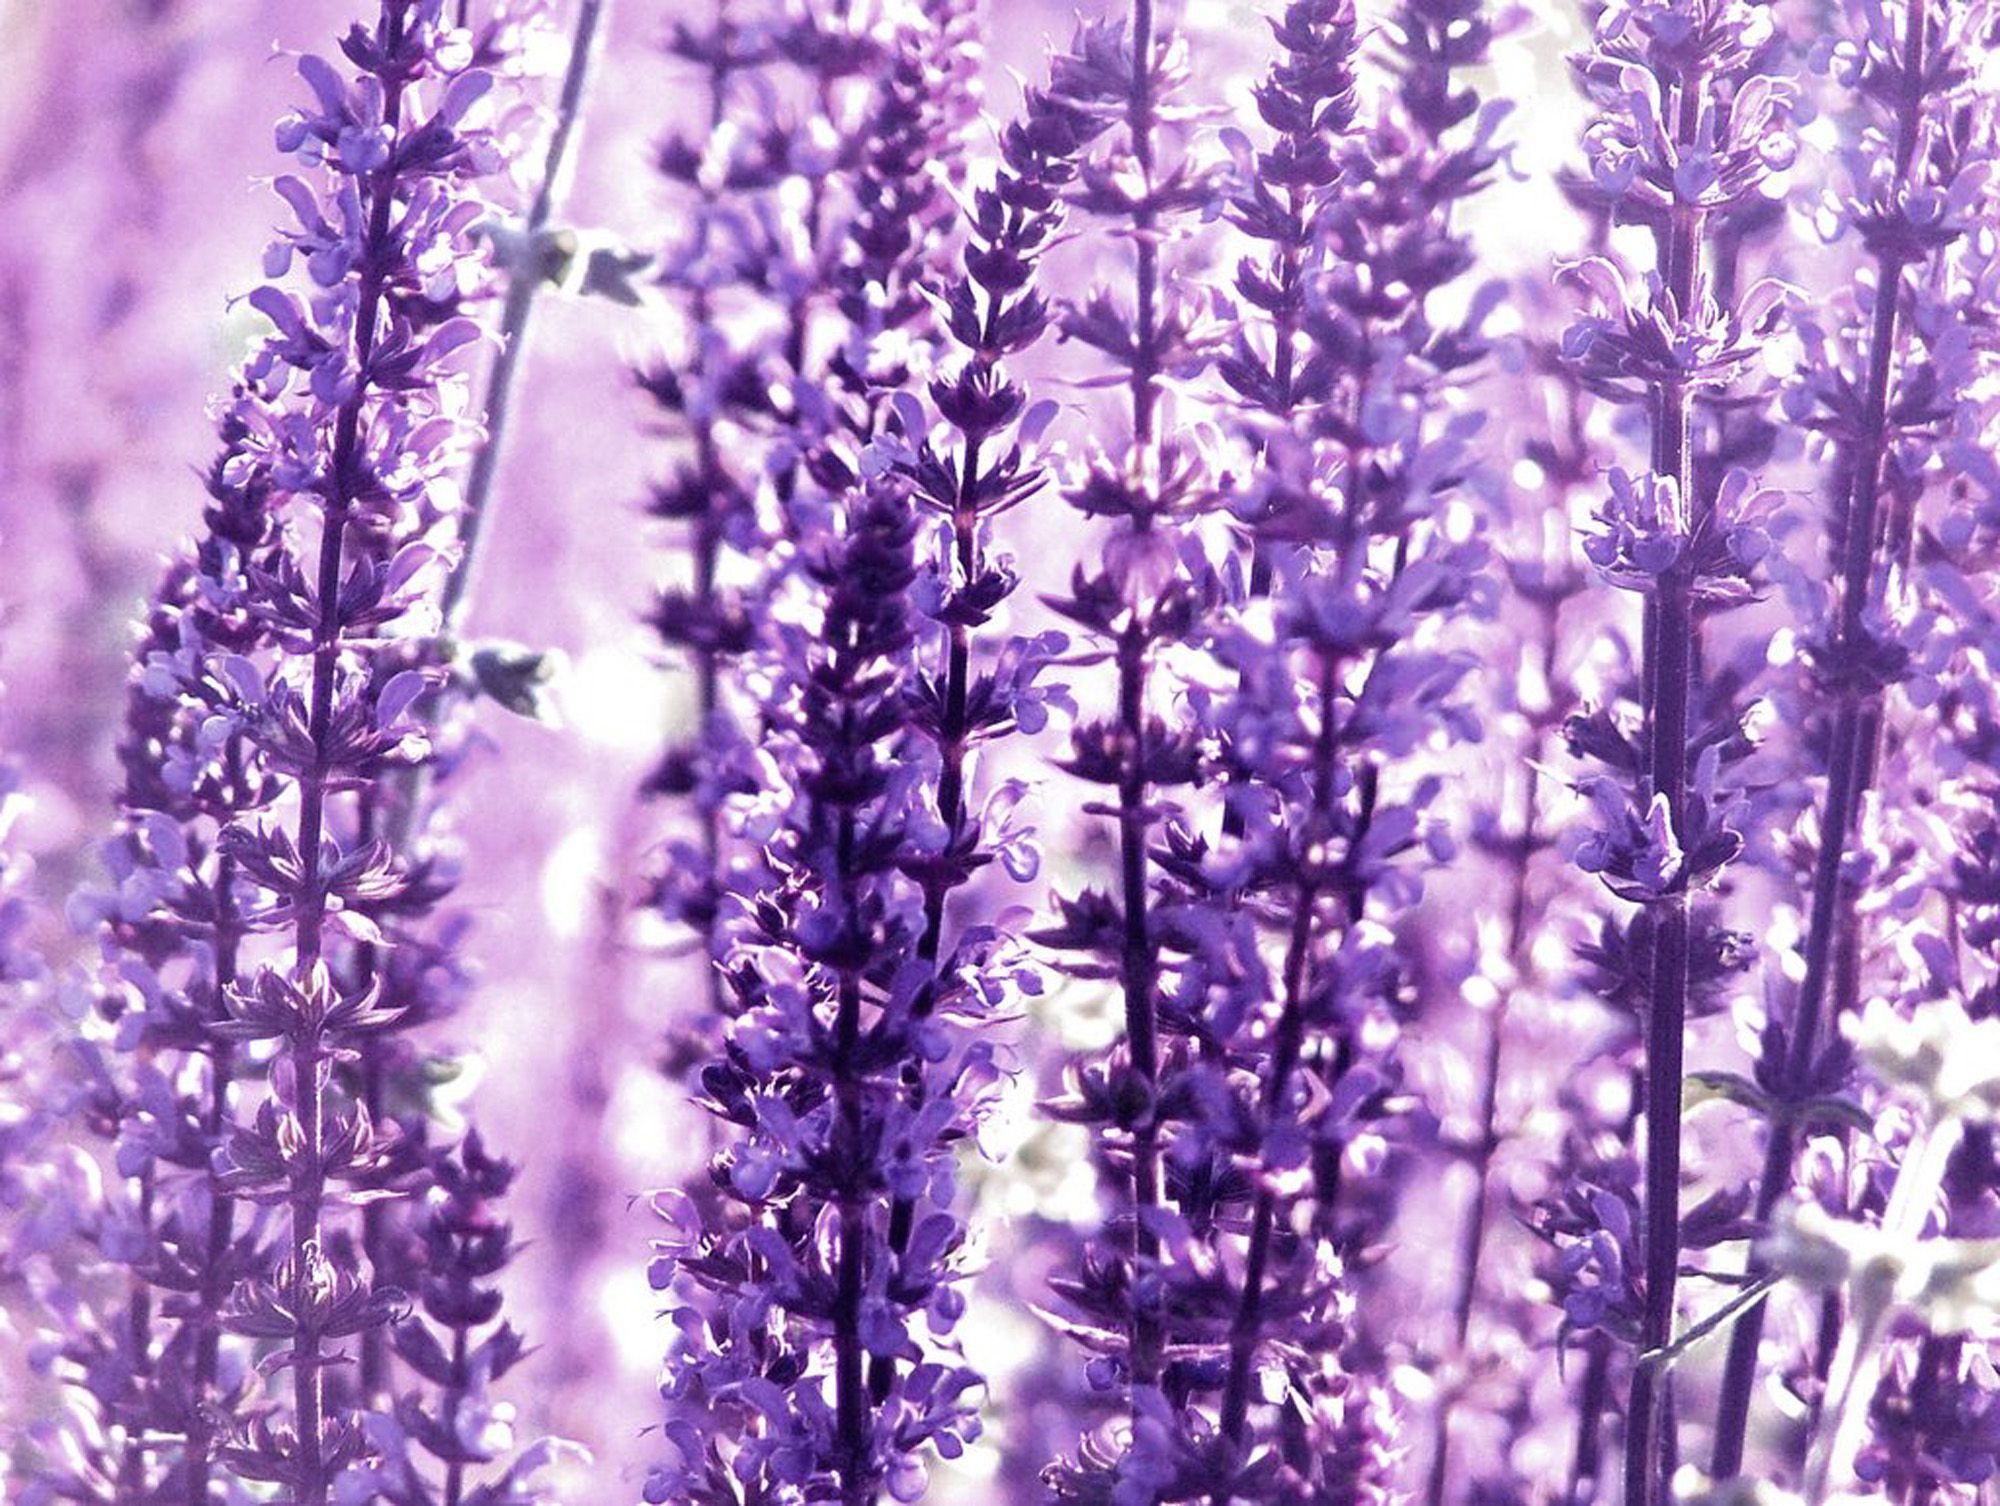 Snowe lavender overview for